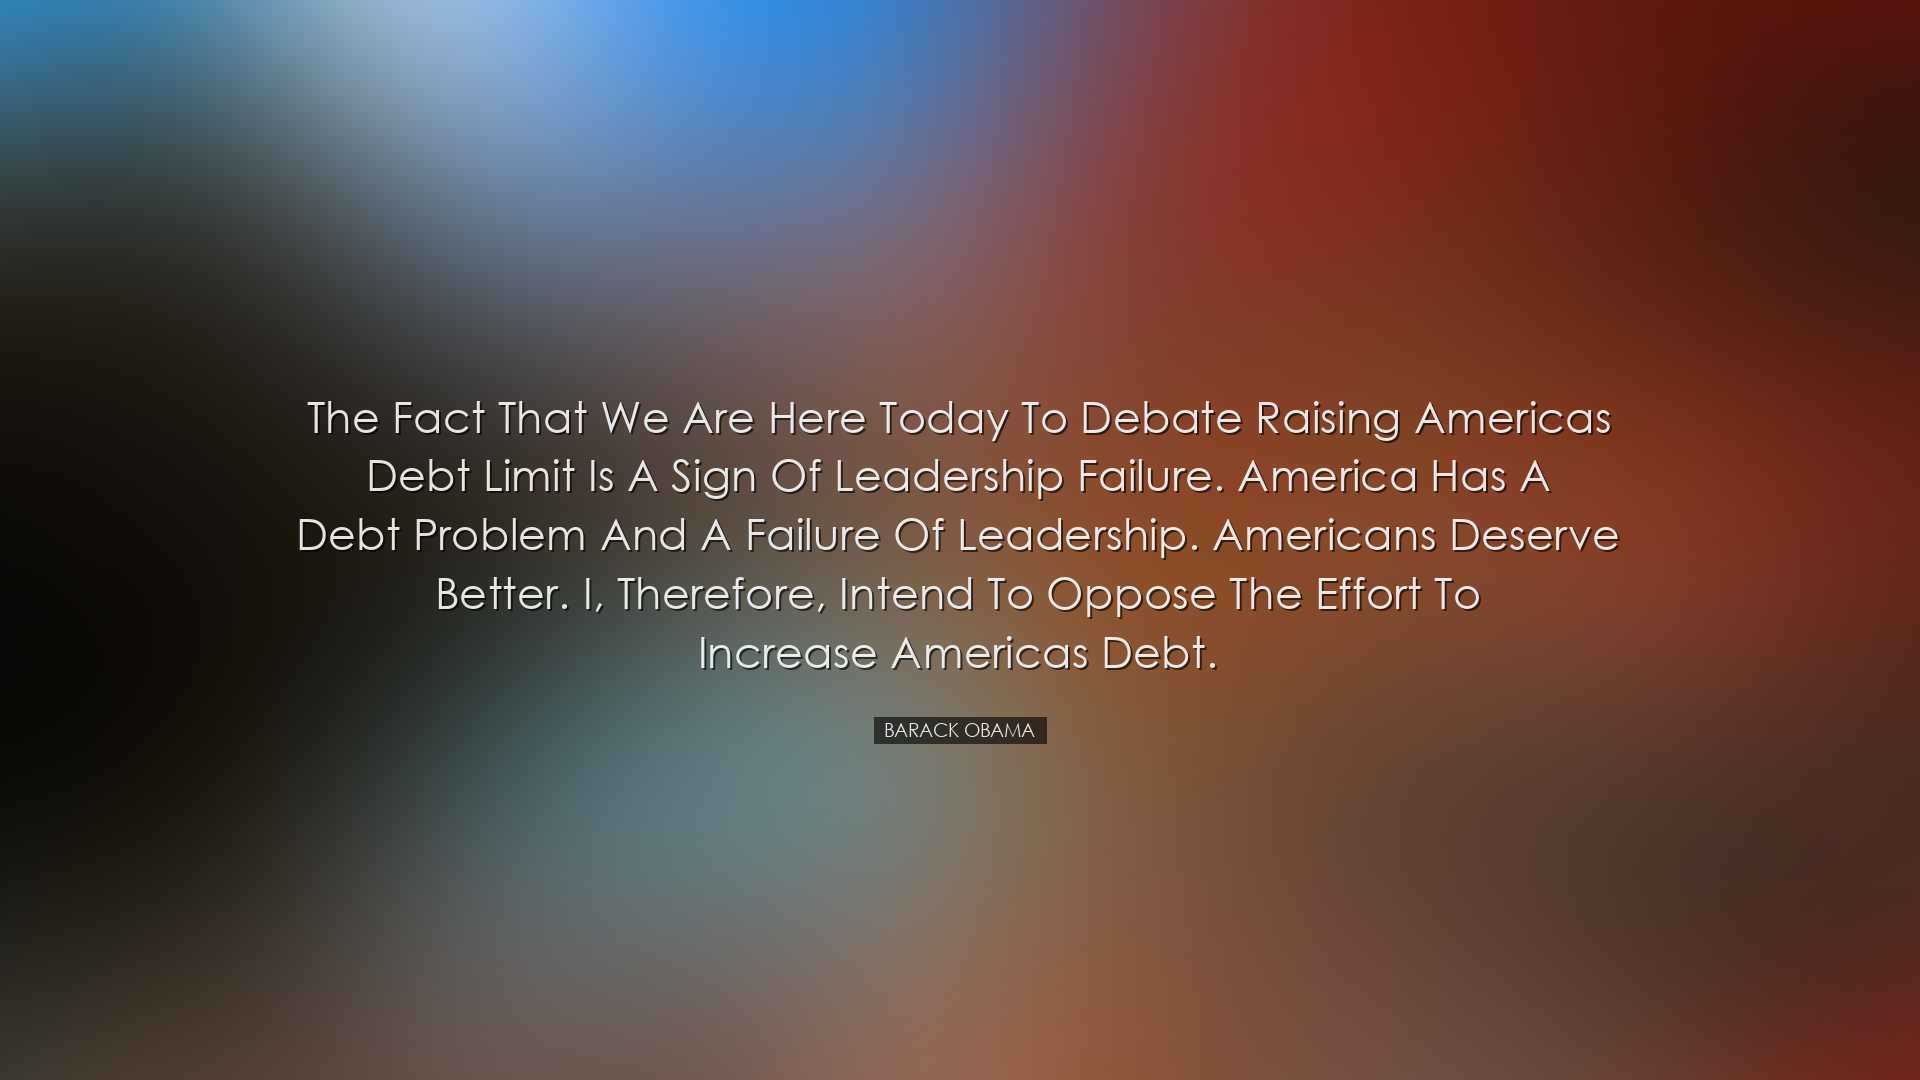 The fact that we are here today to debate raising Americas debt li